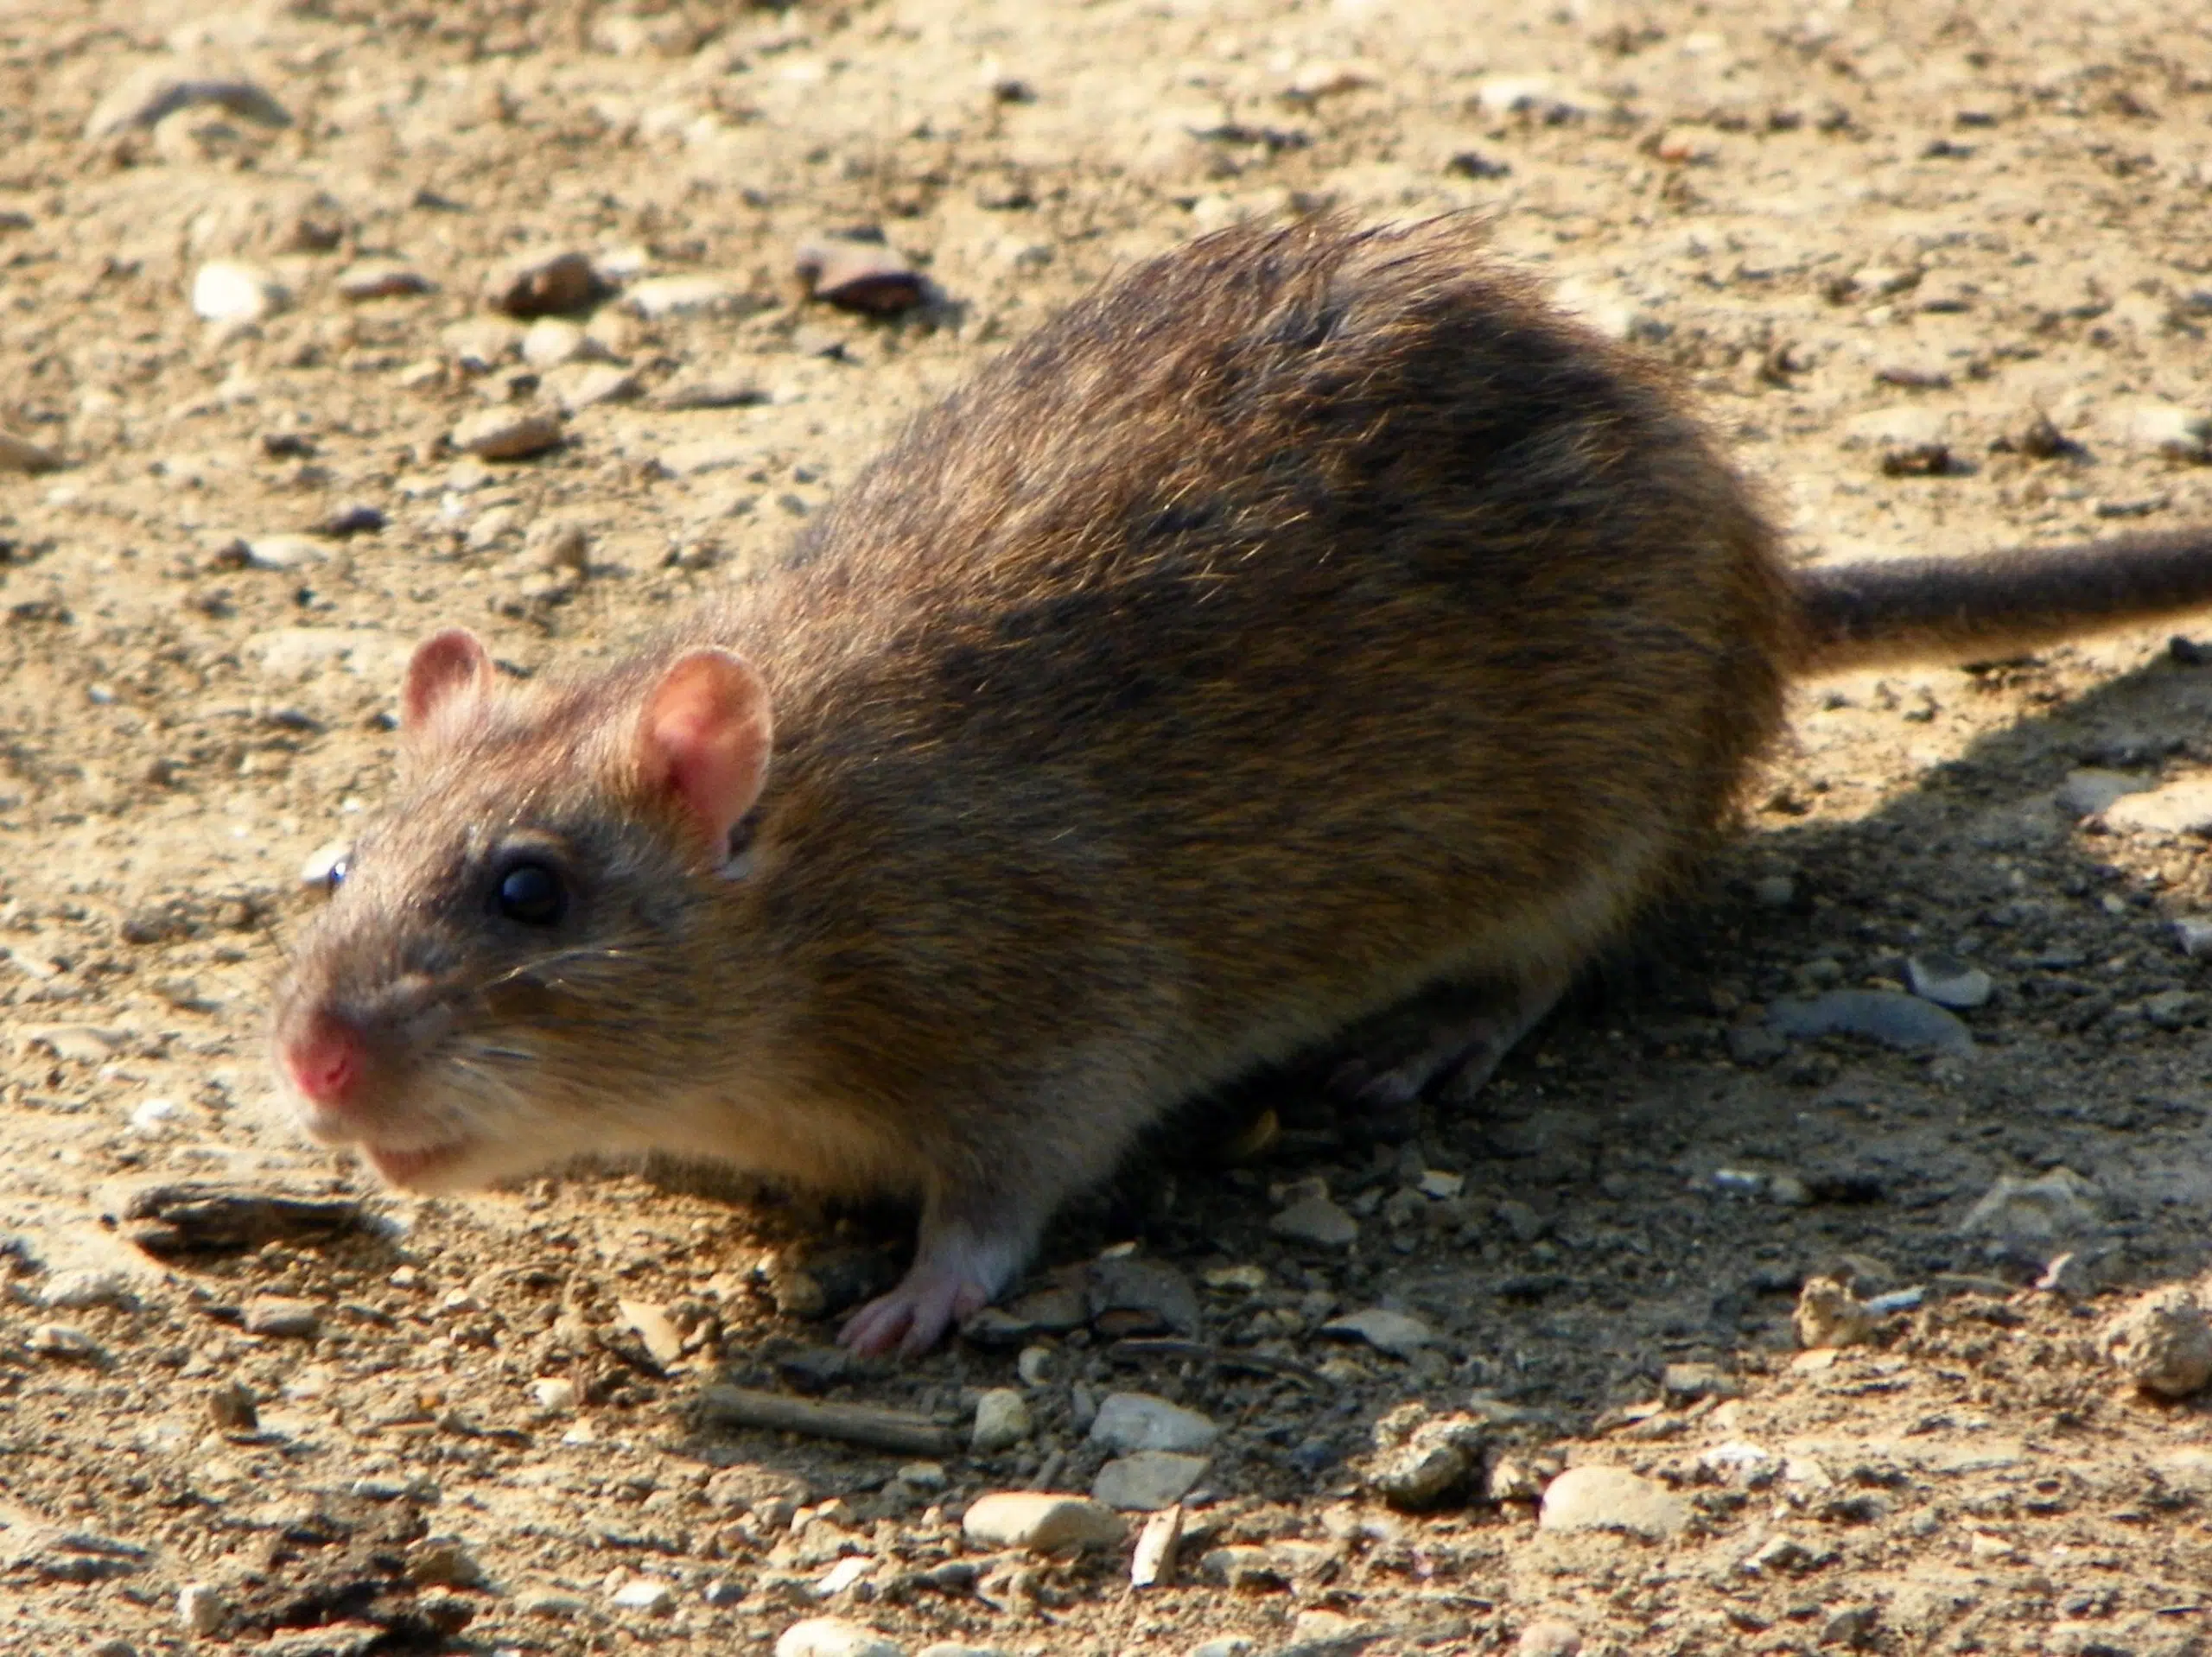 Local pest control expert says the rat problem in Kamloops is getting worse